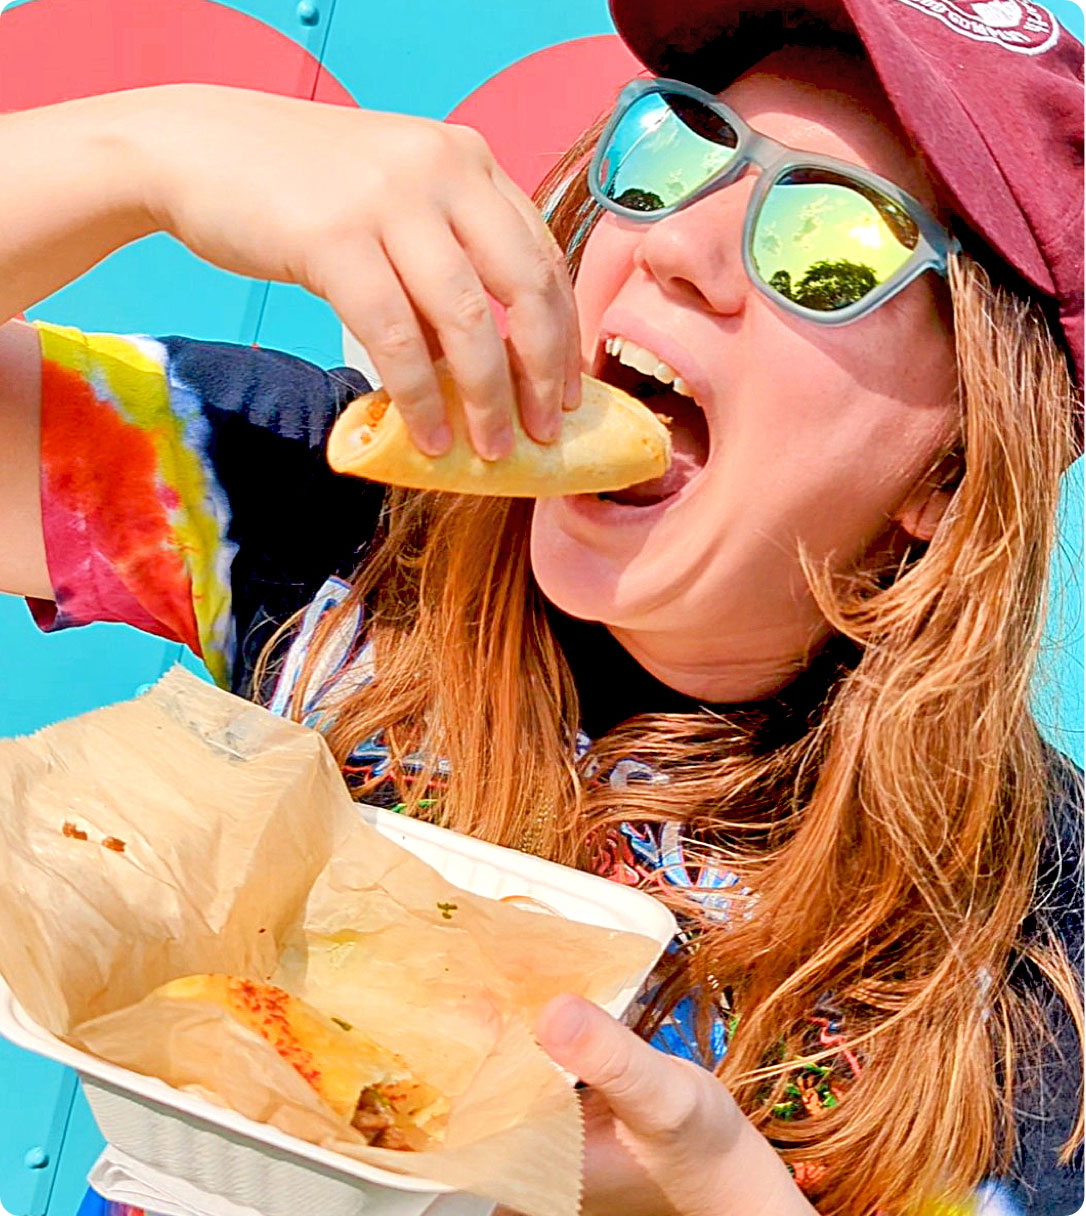 Woman in mirrored visor-style sunglasses eating taco